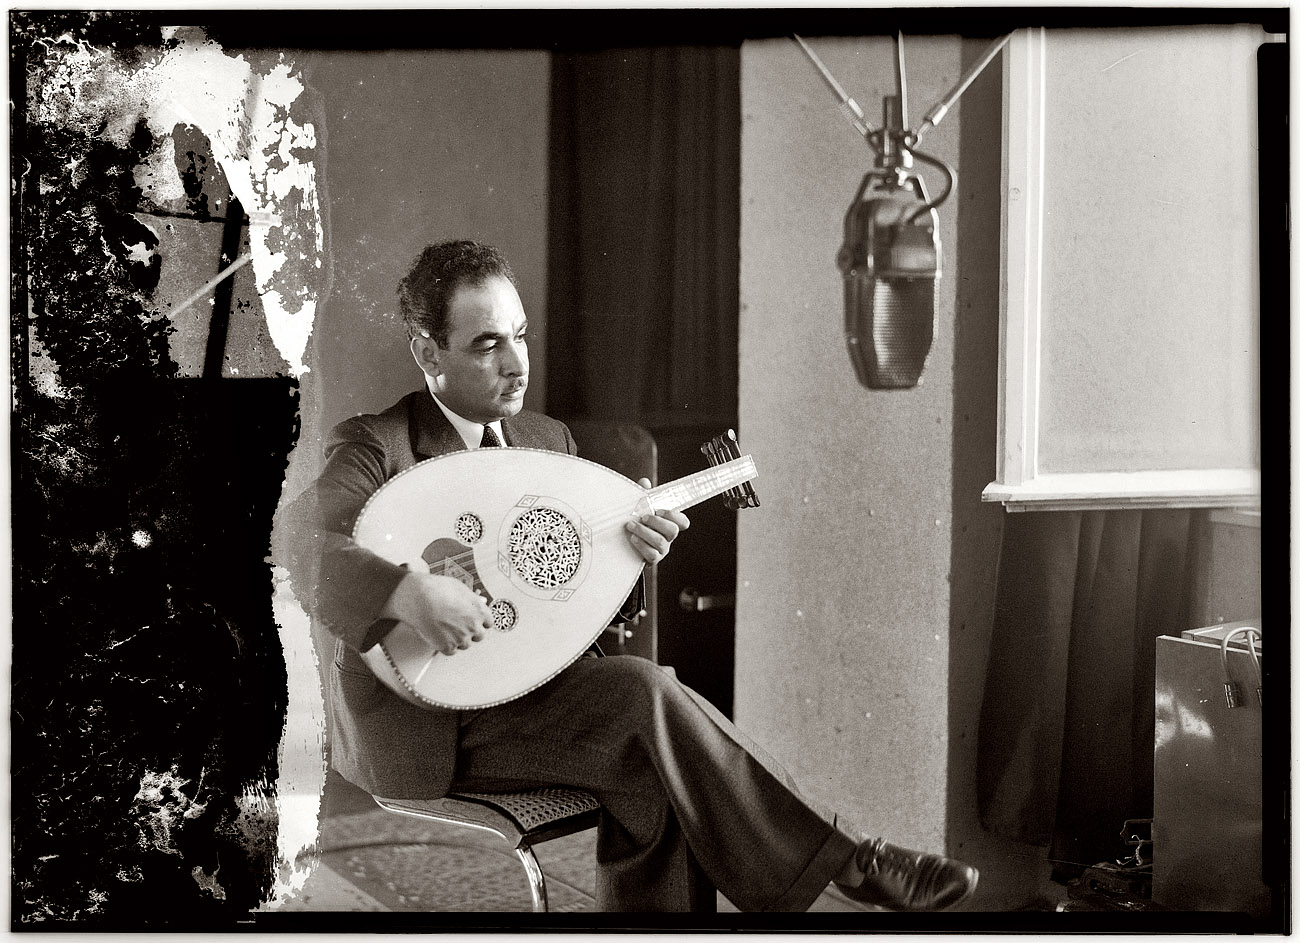 Oud player at the Palestine Broadcasting Service studios in Jerusalem circa 1940 during the British Mandate. View full size. 5x7 acetate, Matson Photo Service.